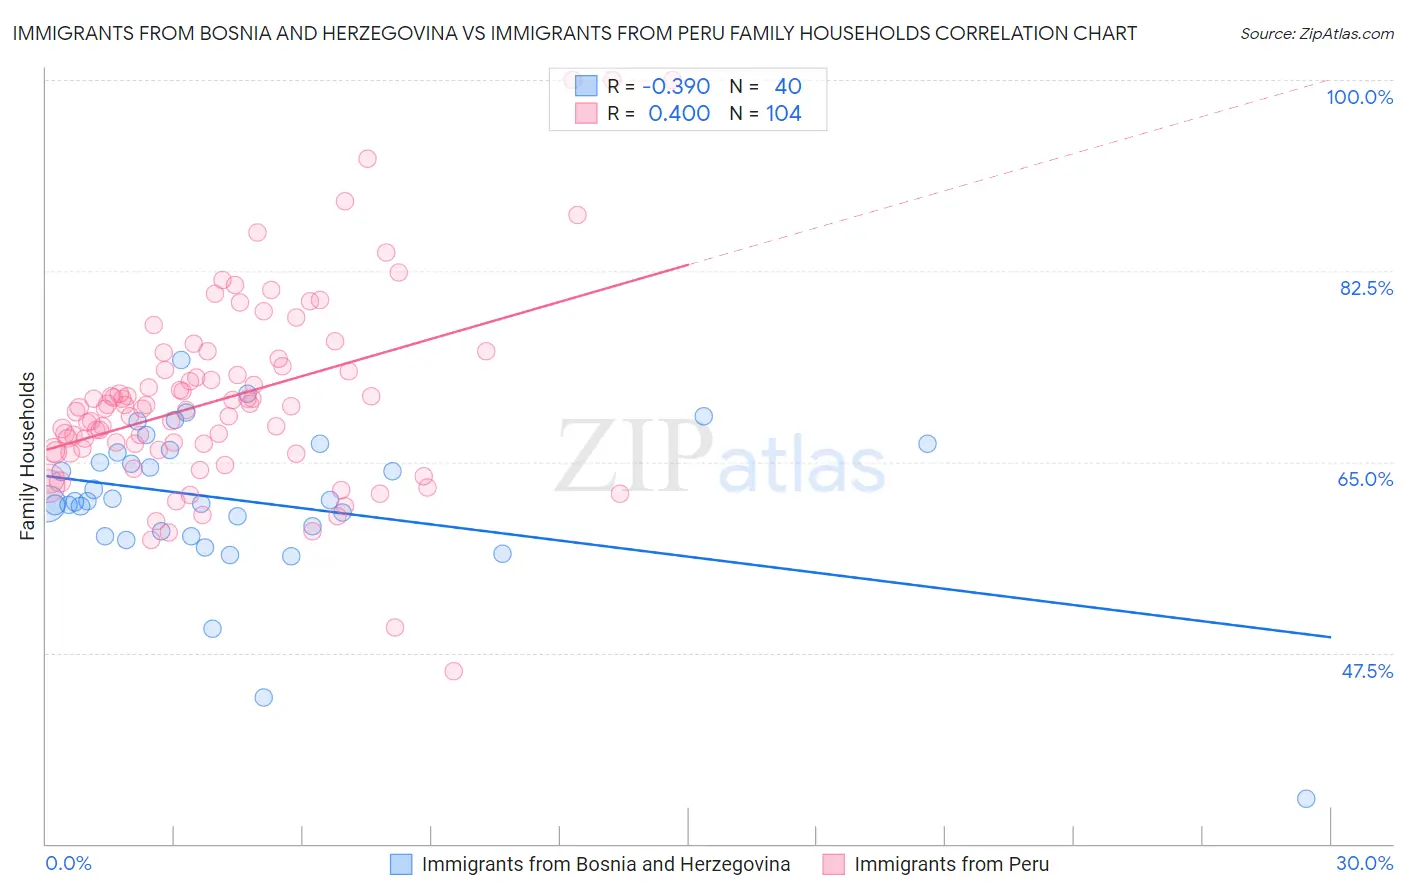 Immigrants from Bosnia and Herzegovina vs Immigrants from Peru Family Households